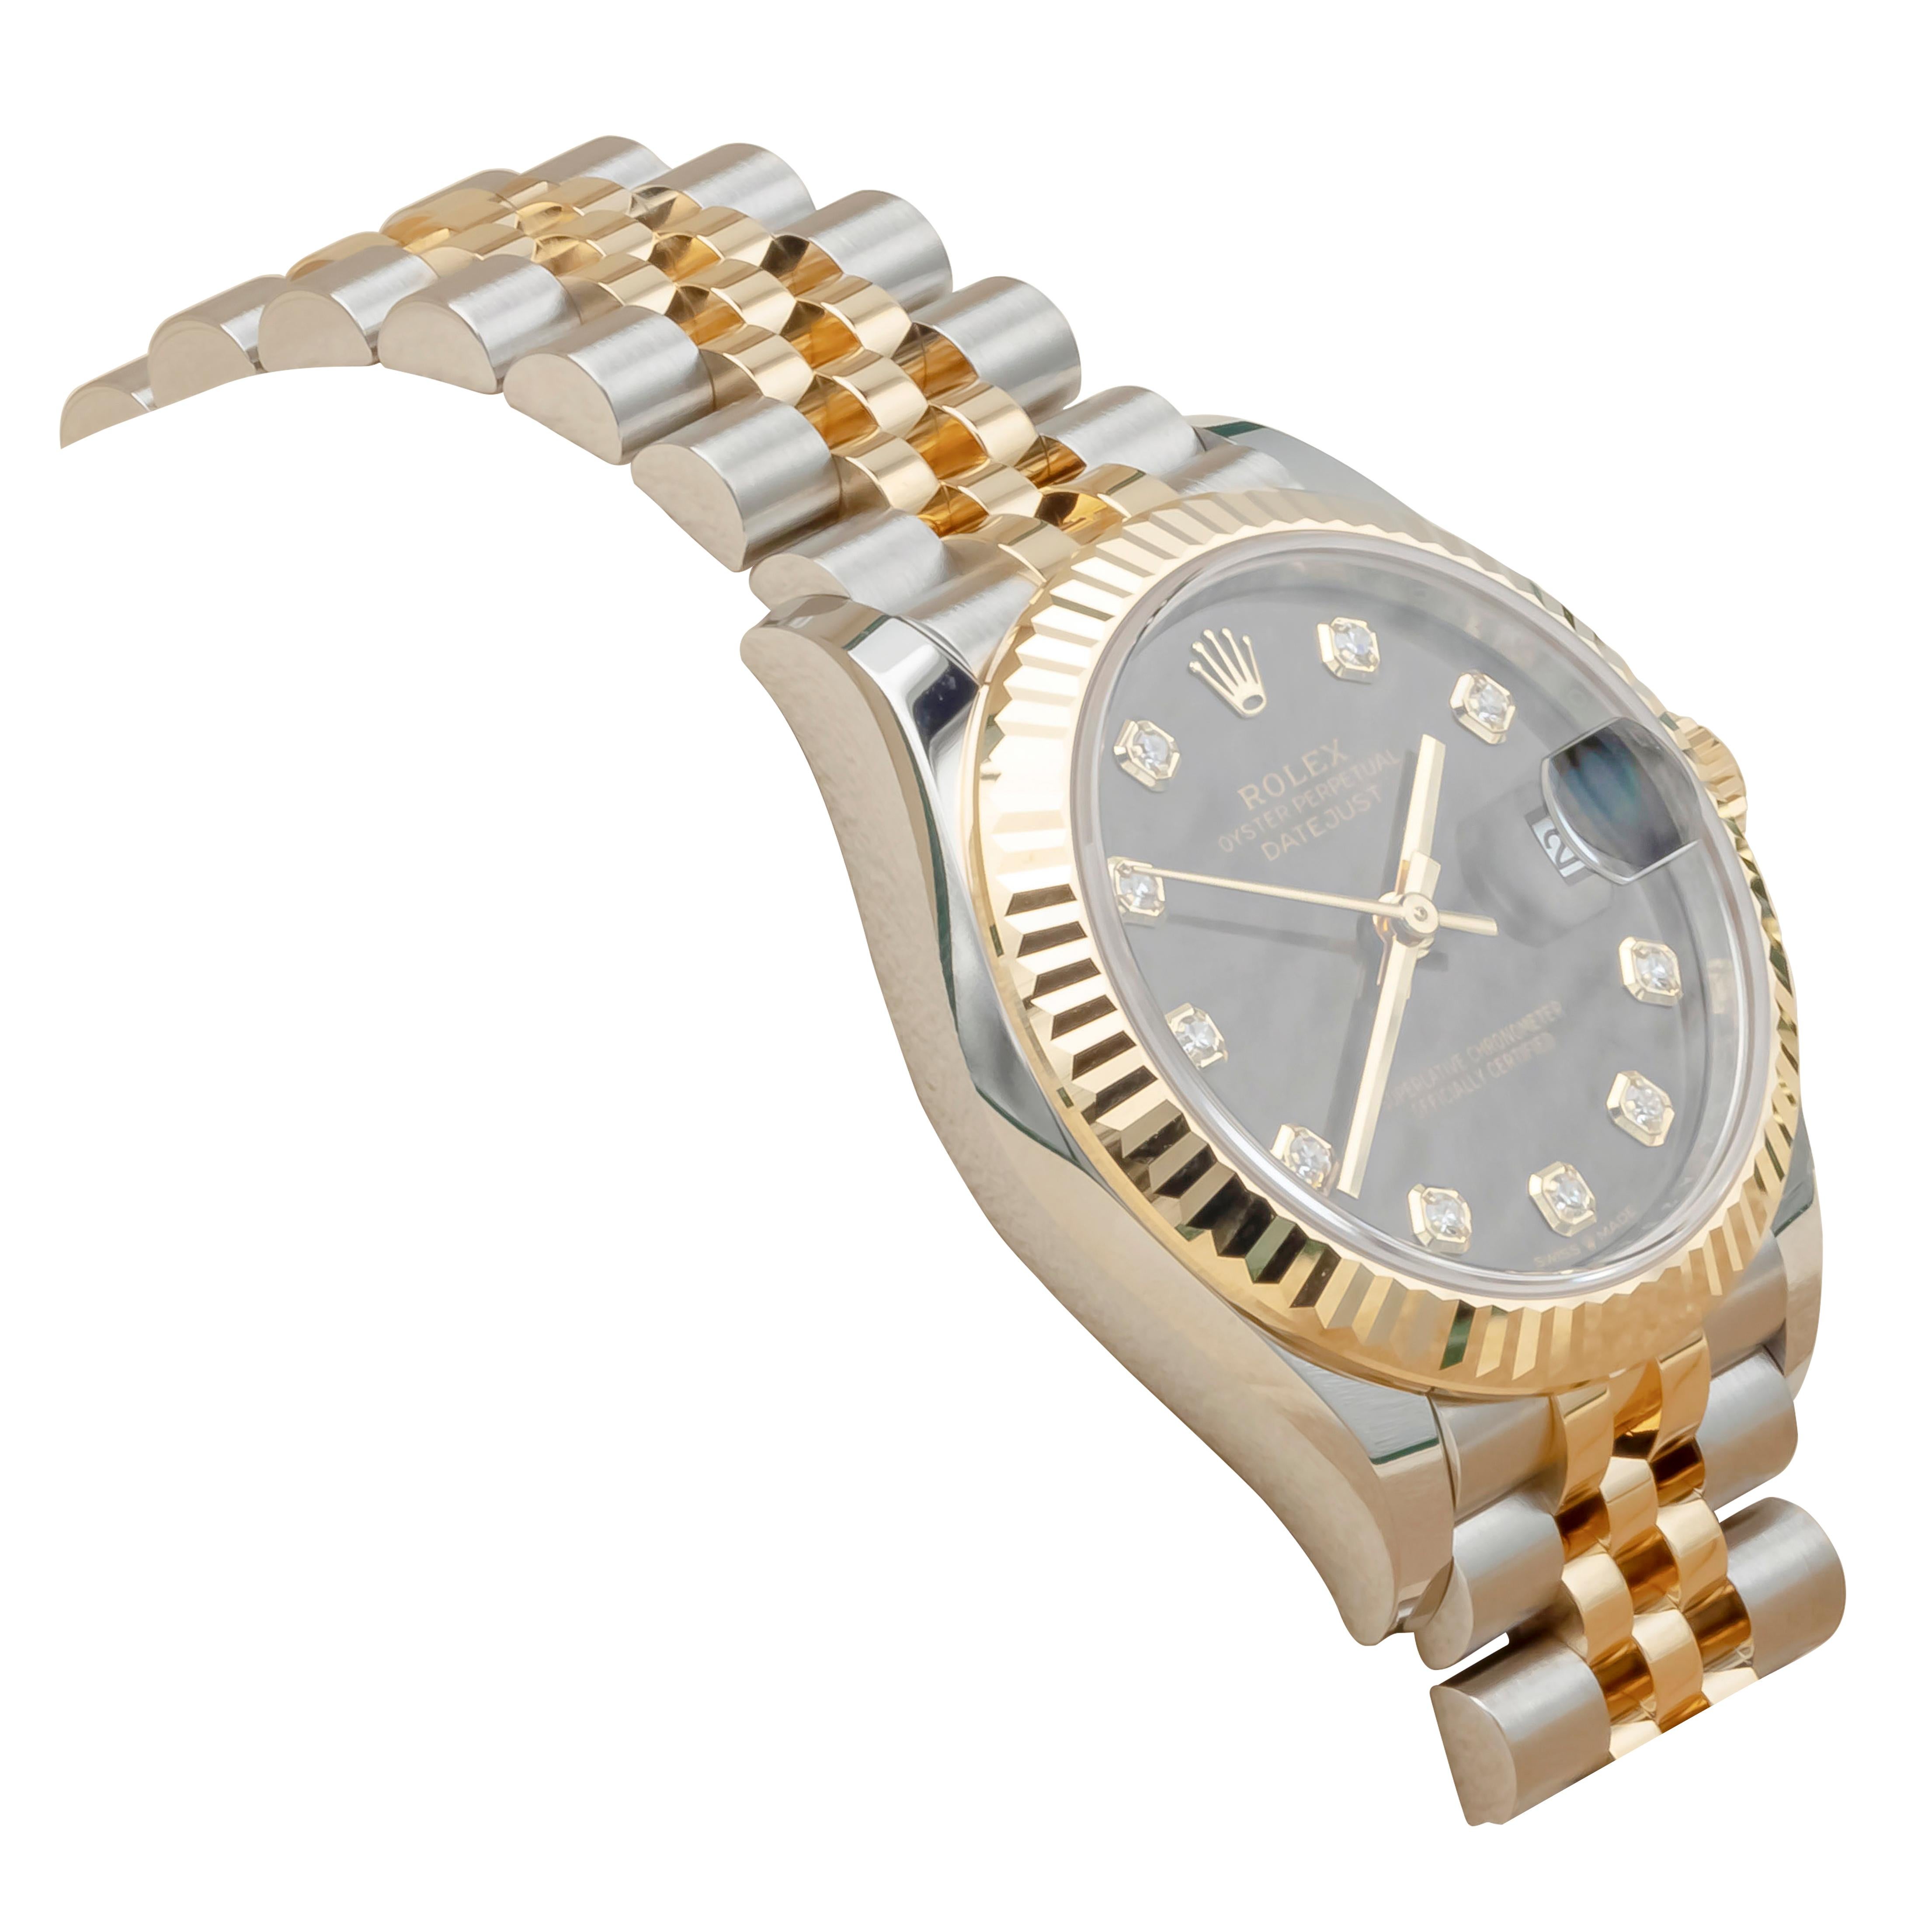 Rolex Datejust 31 Midsize Steel Rose Gold Diamond Ladies Watch 278273. Officially certified chronometer self-winding movement. Rolex logo on 18K yellow gold crown. 18K yellow gold fluted bezel. Scratch resistant sapphire crystal with cyclops